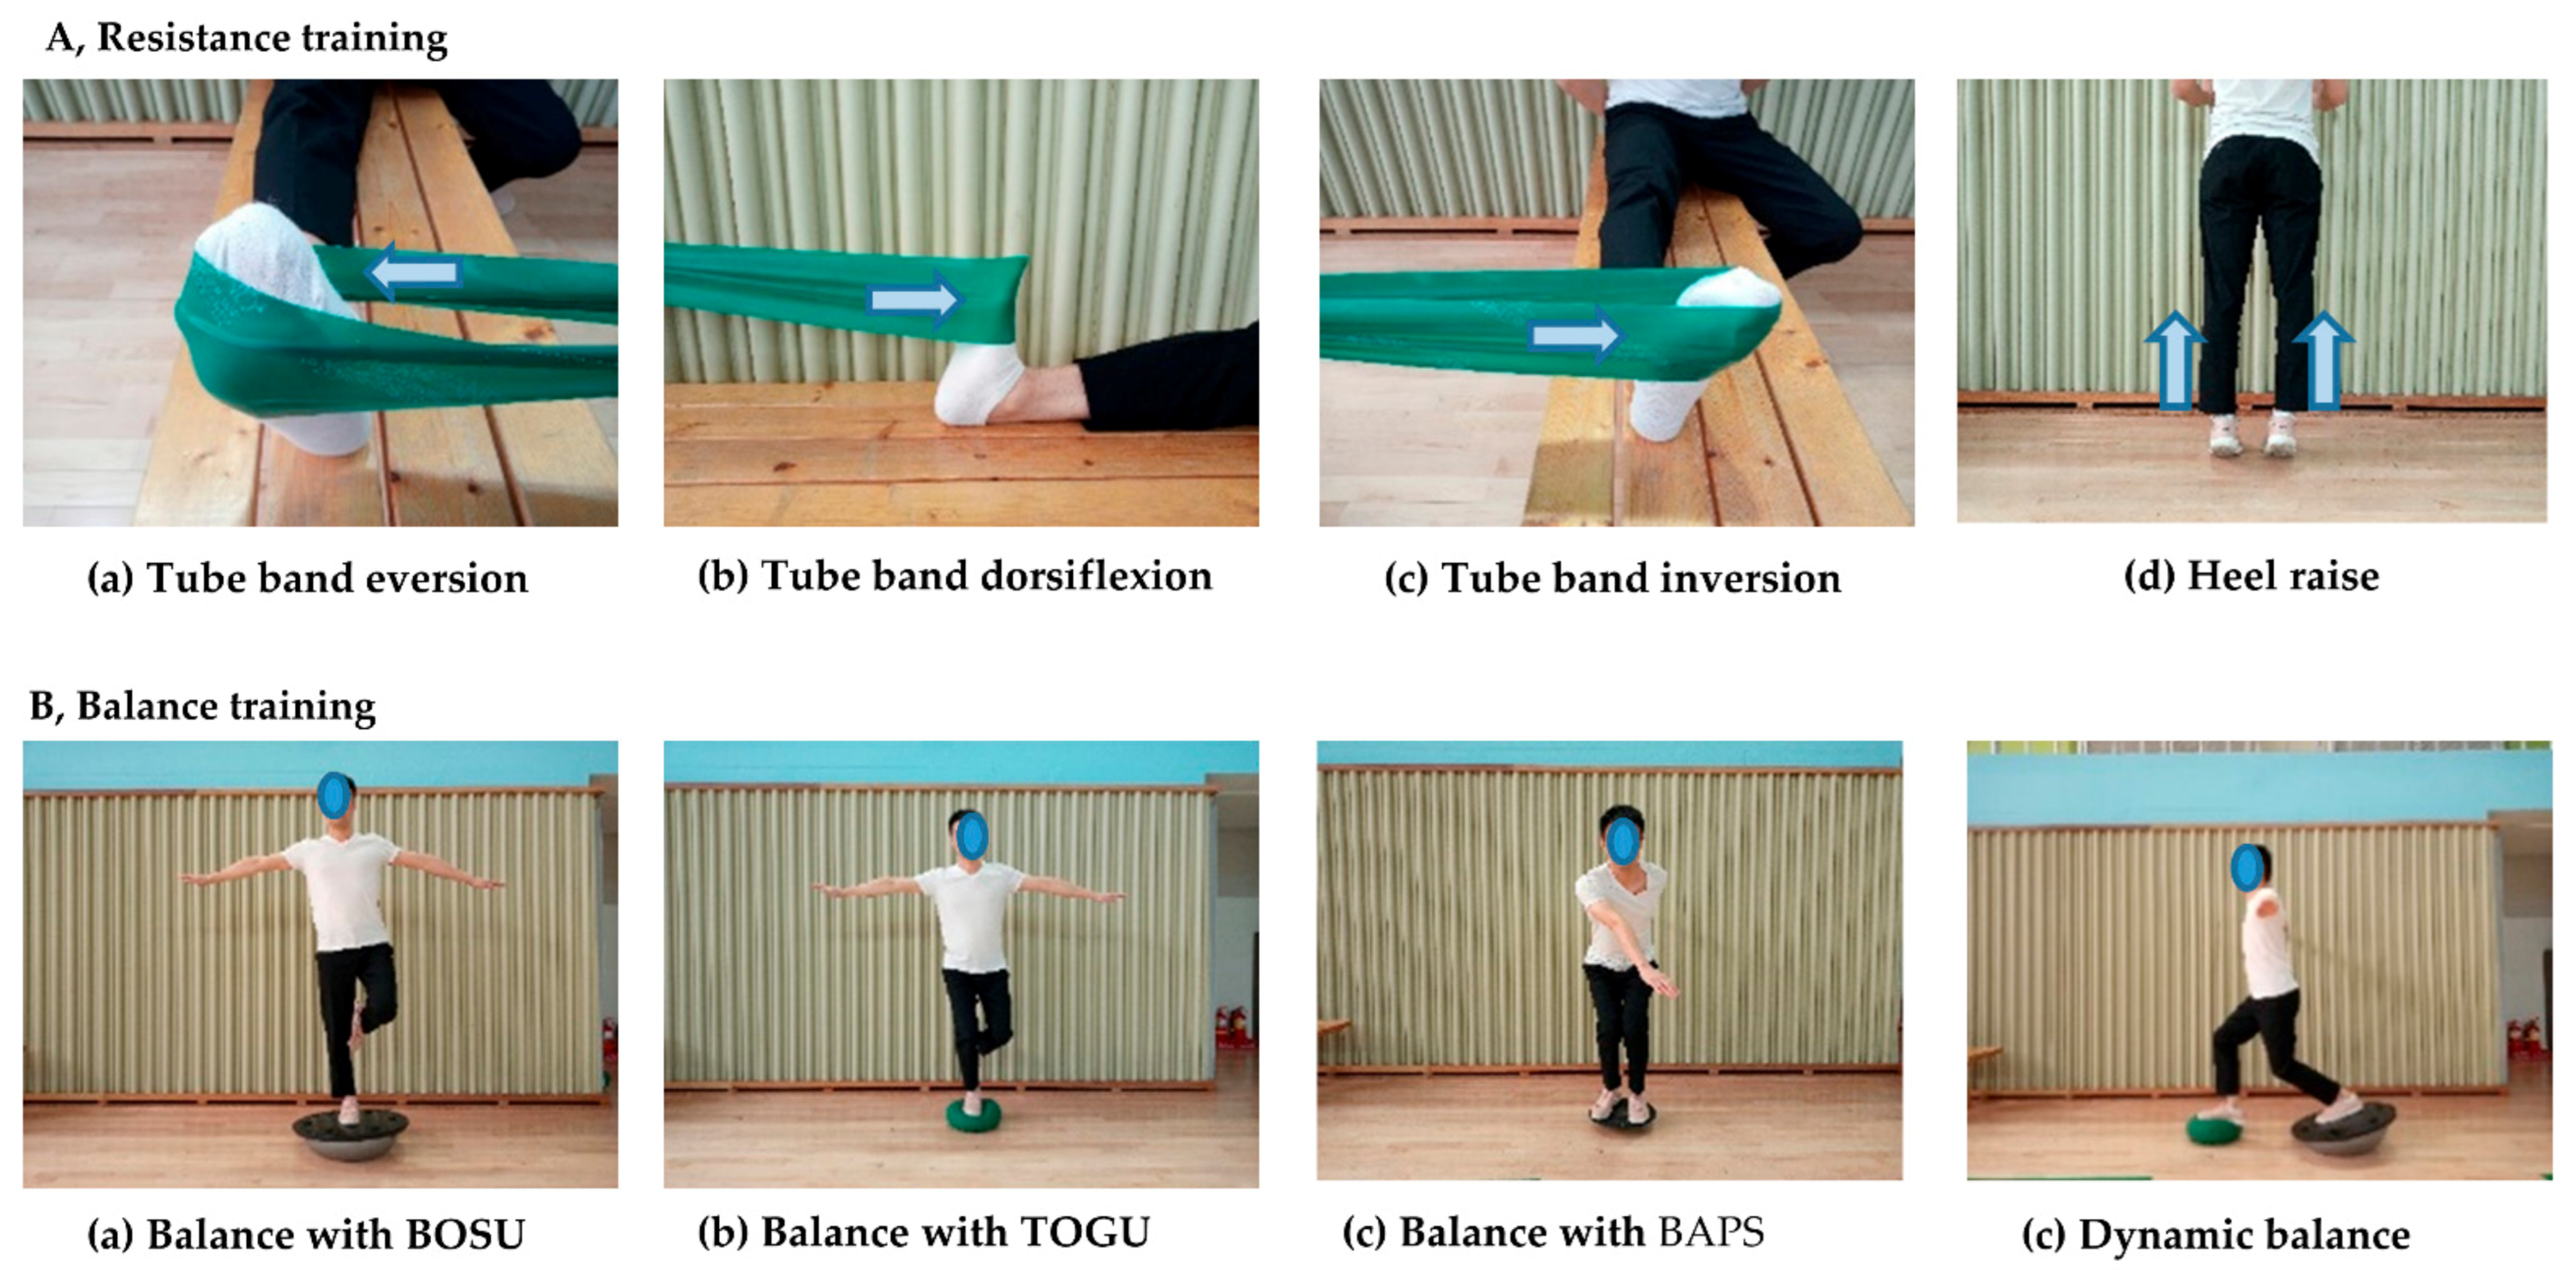 5 of the Best Exercises for Chronic Ankle Instability